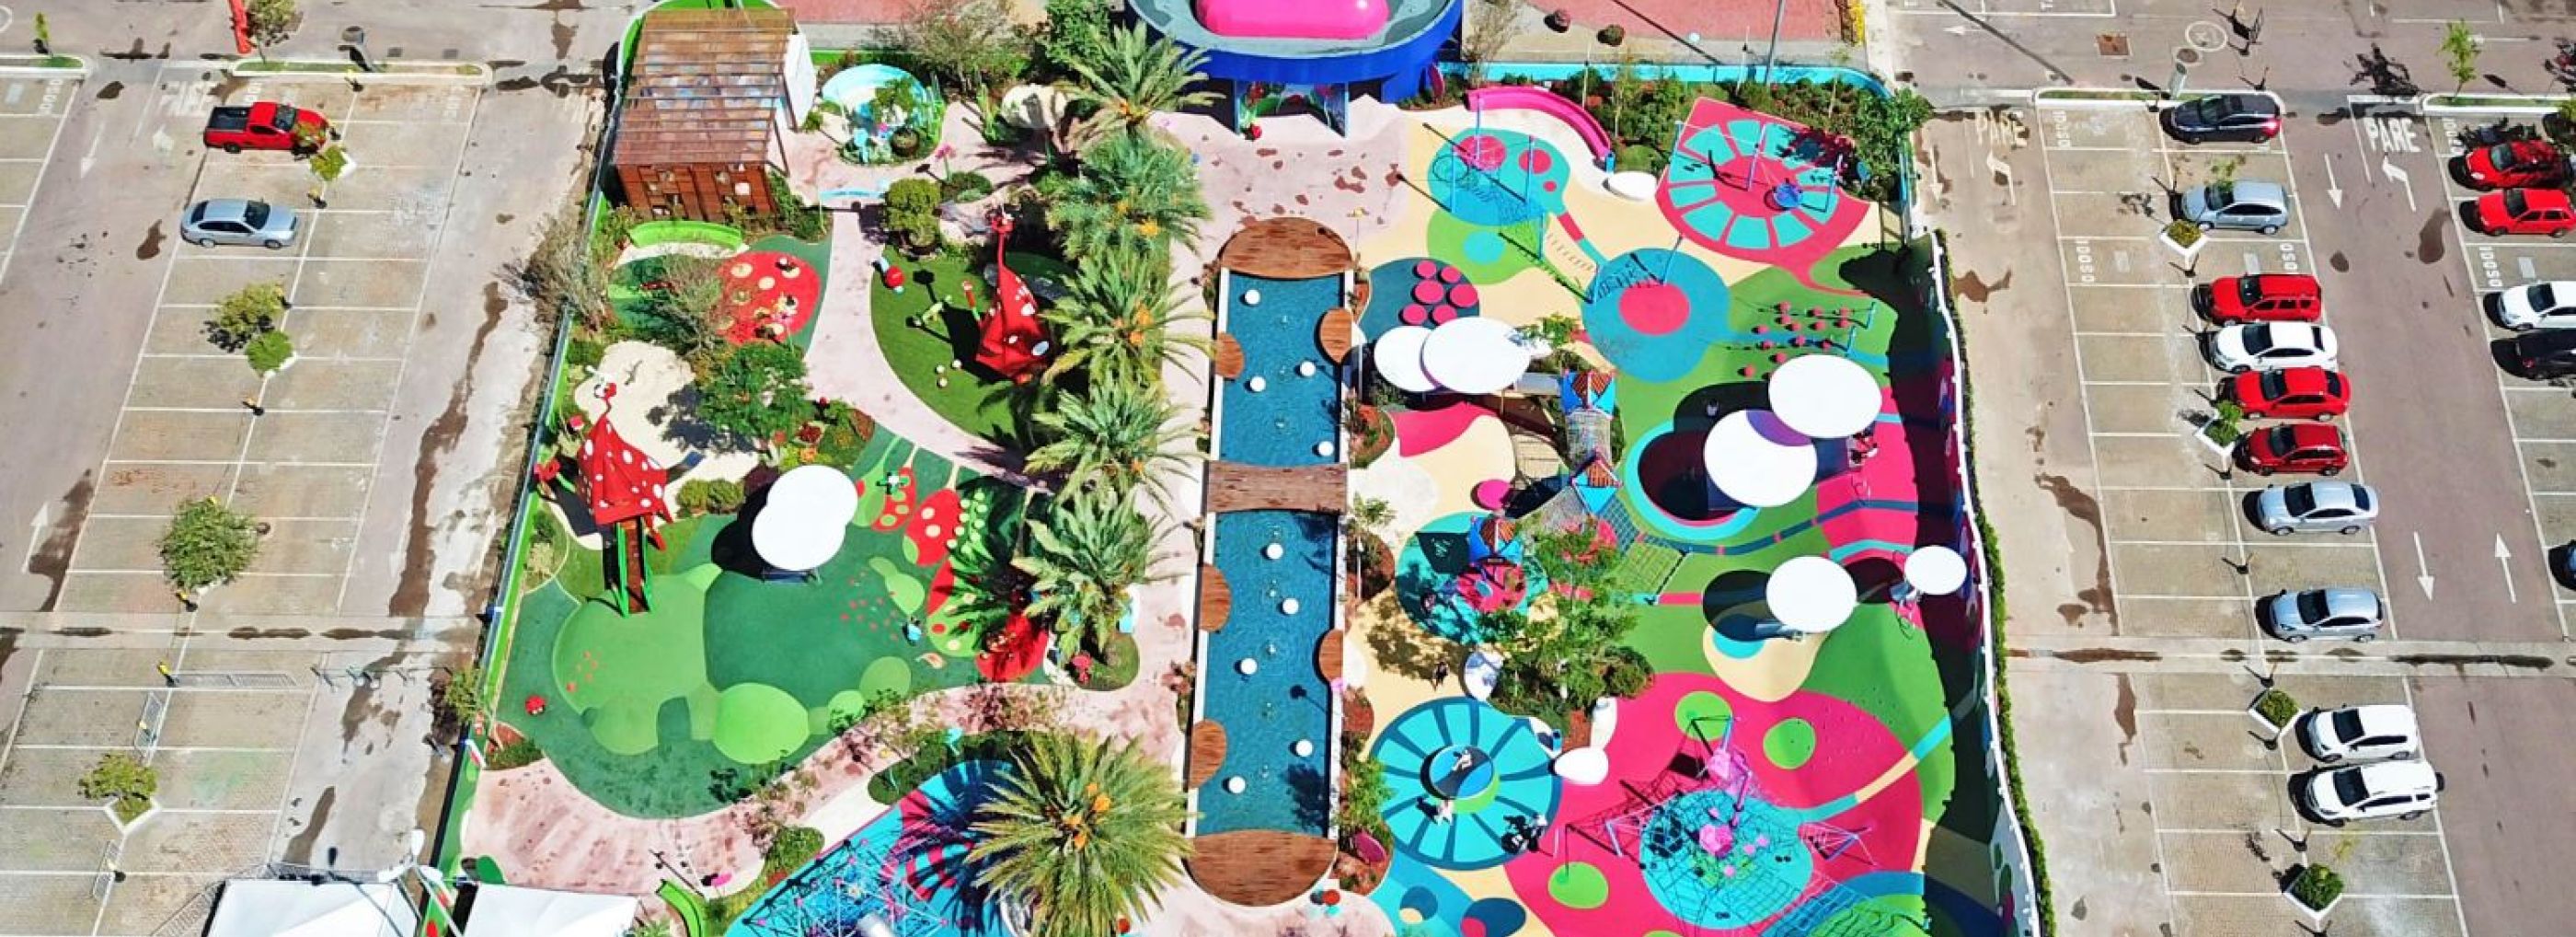 Image of a colourful splash park taken from high above.